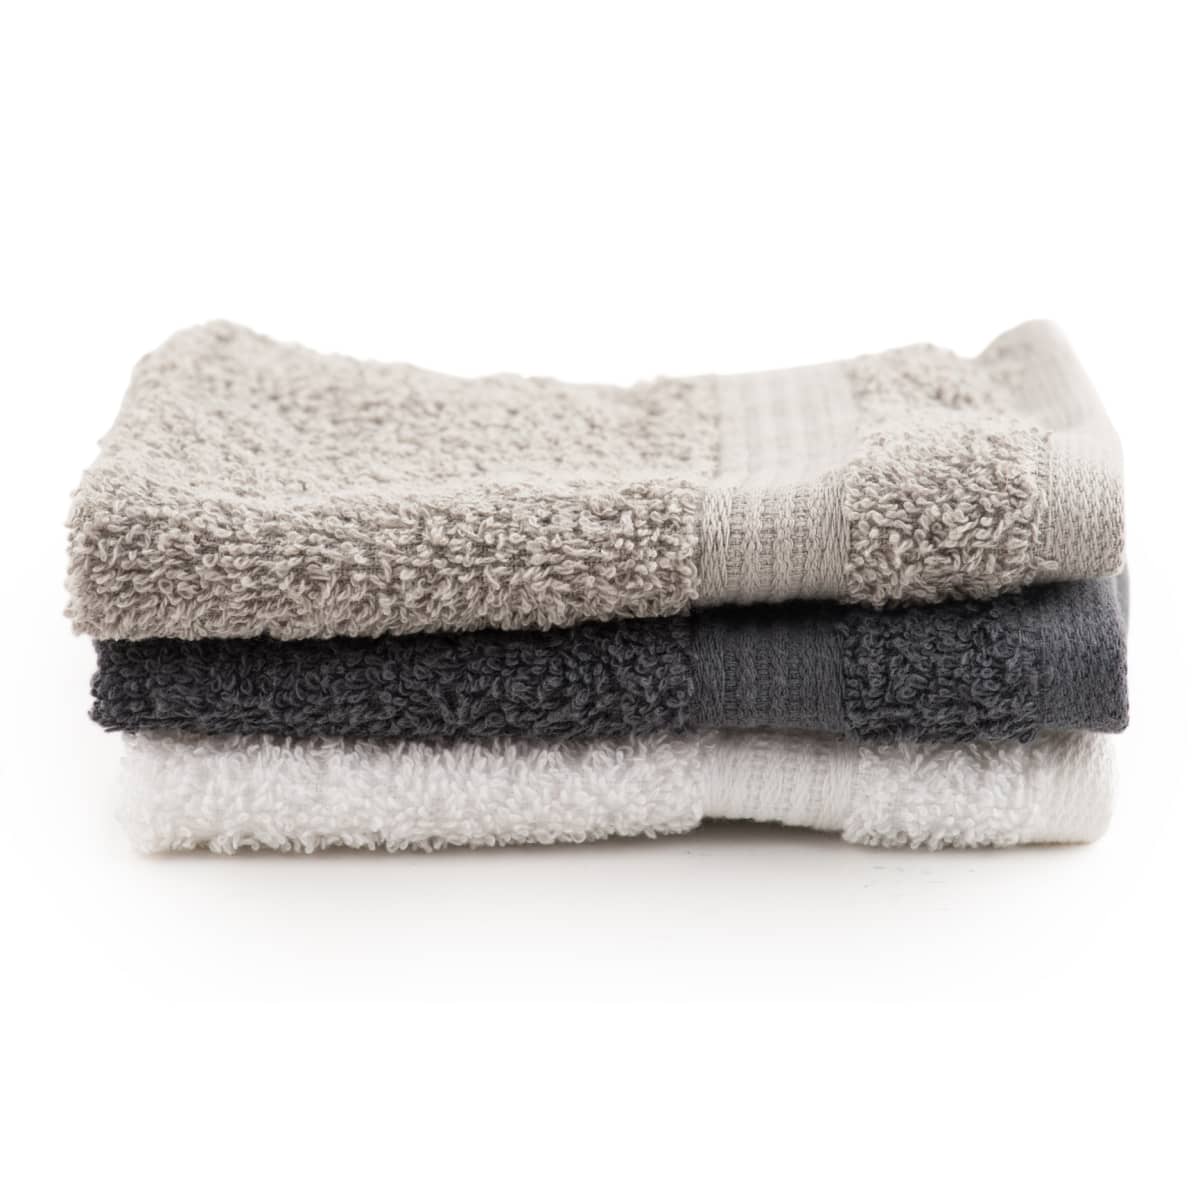 White, black, gray bath towels in stack on white background